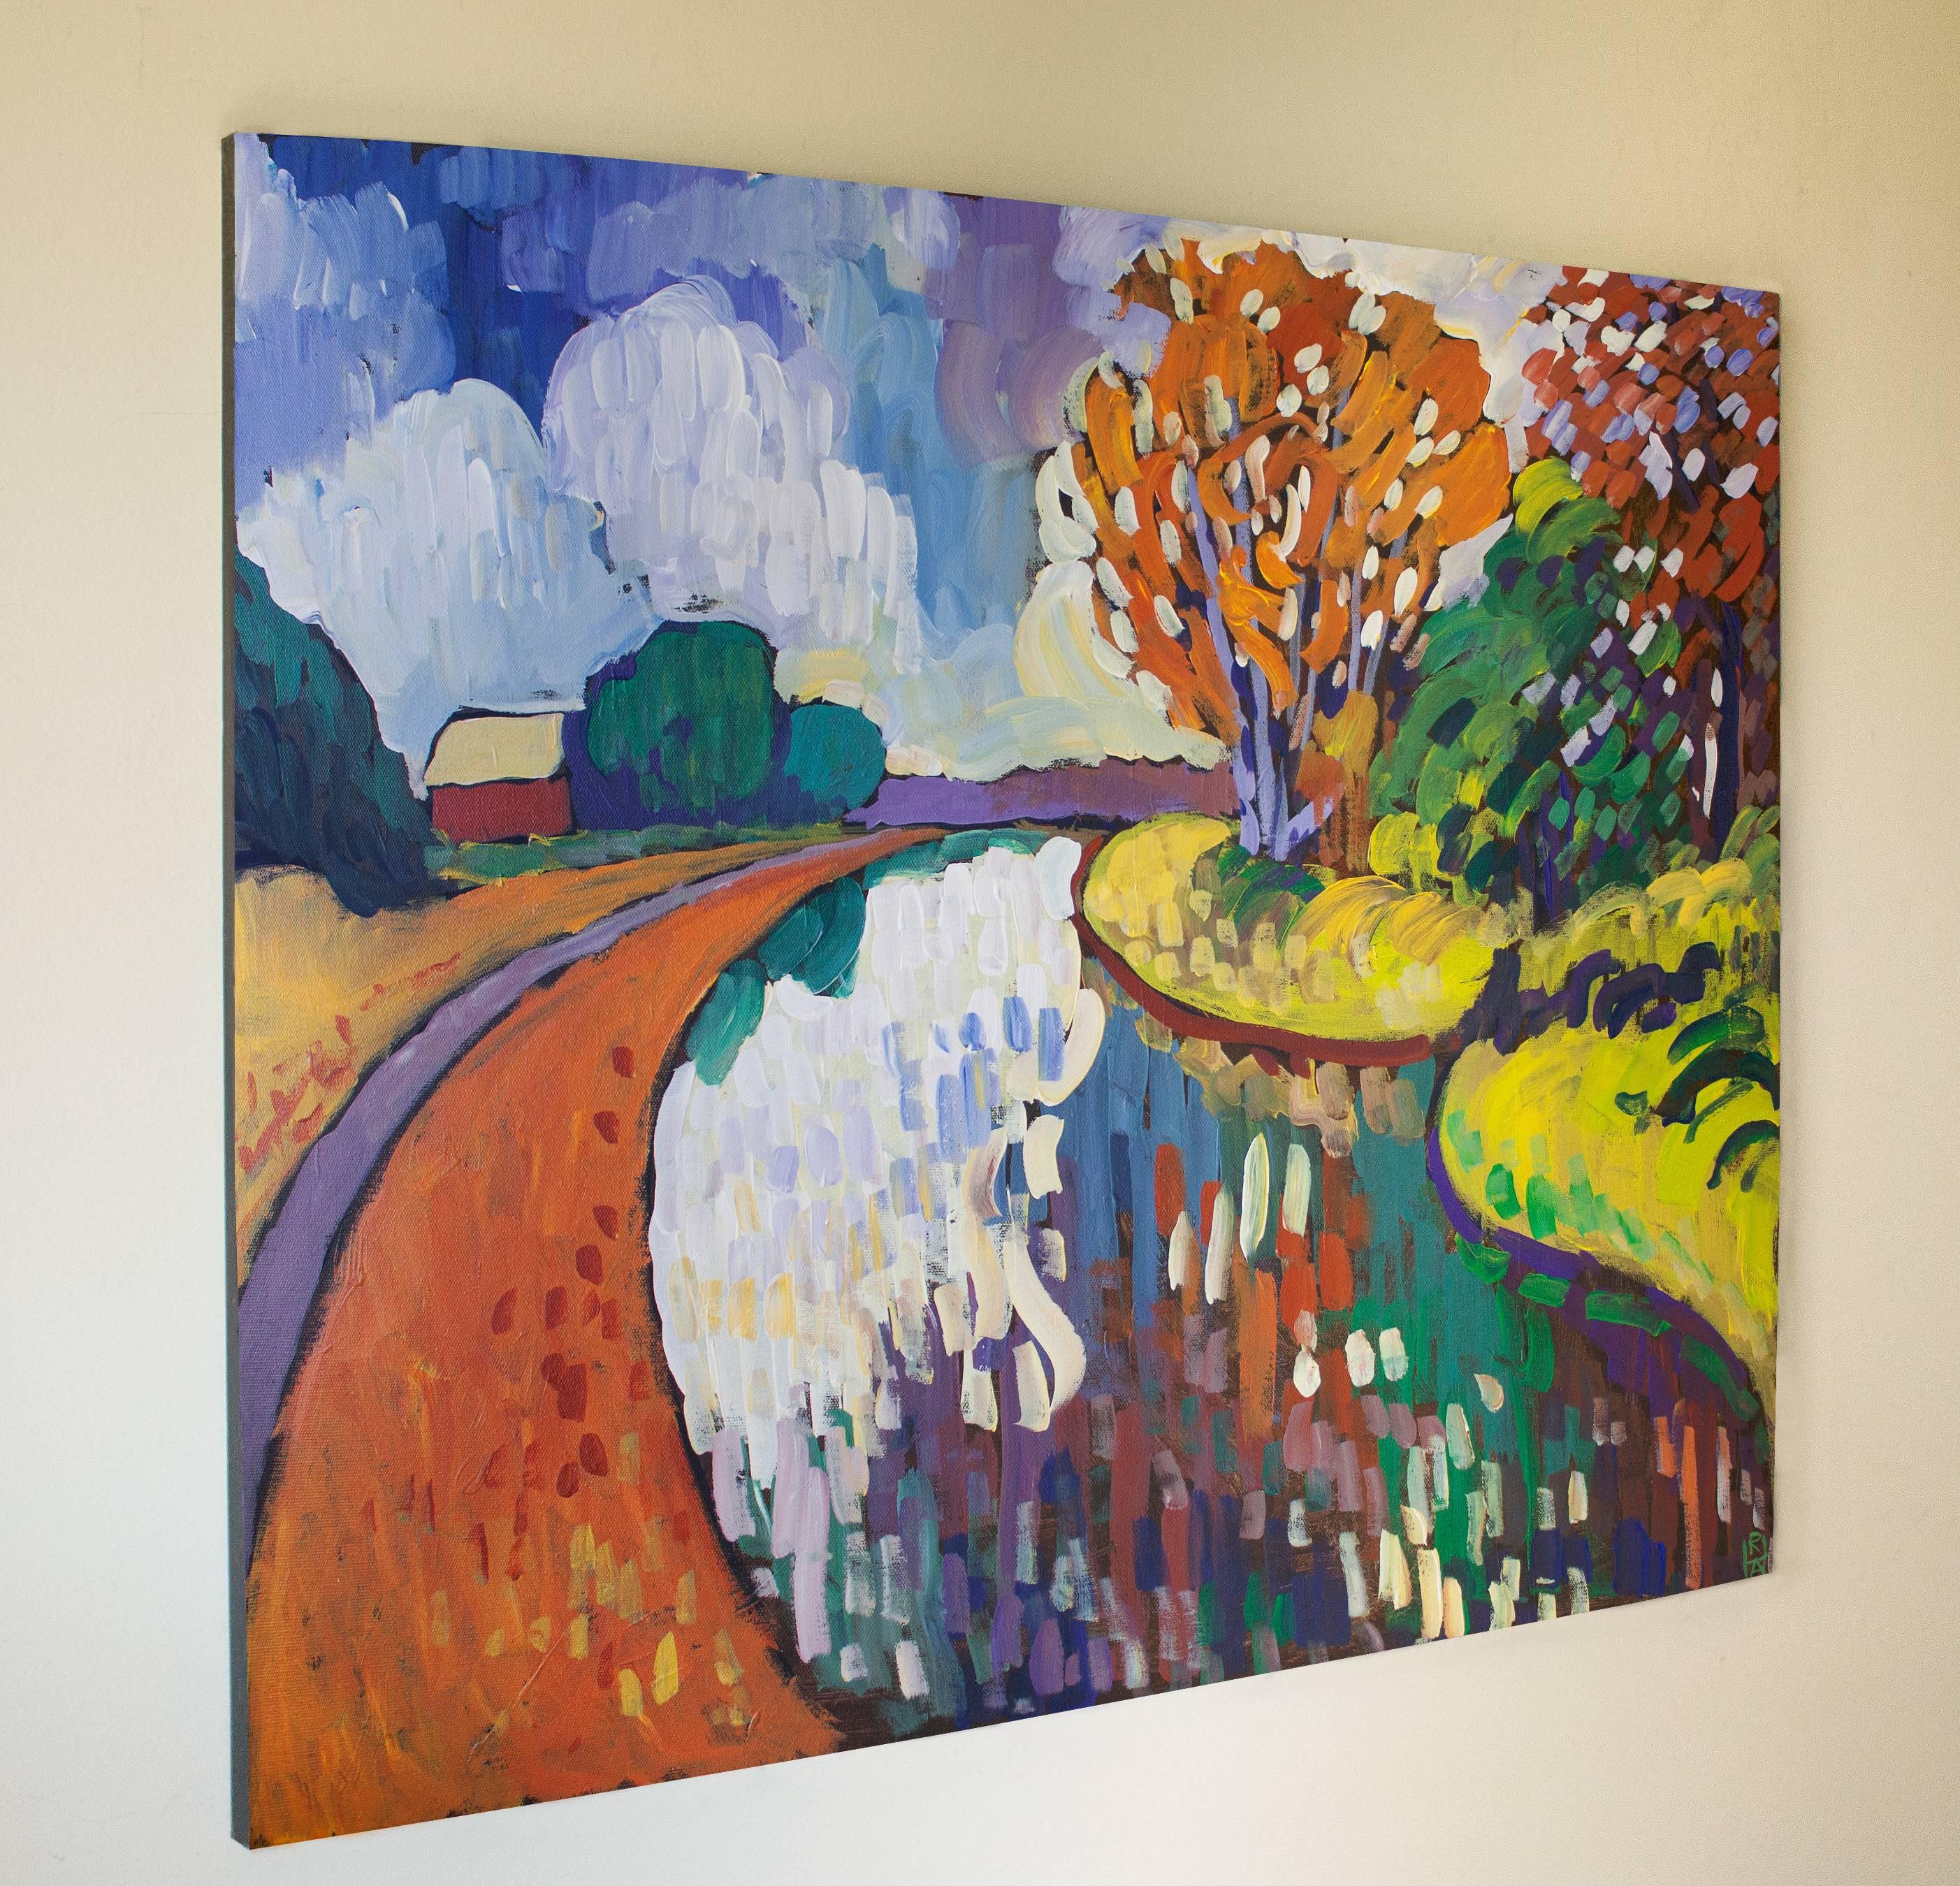 Idyll Robert Hofherr Acrylic painting on stretched canvas 2